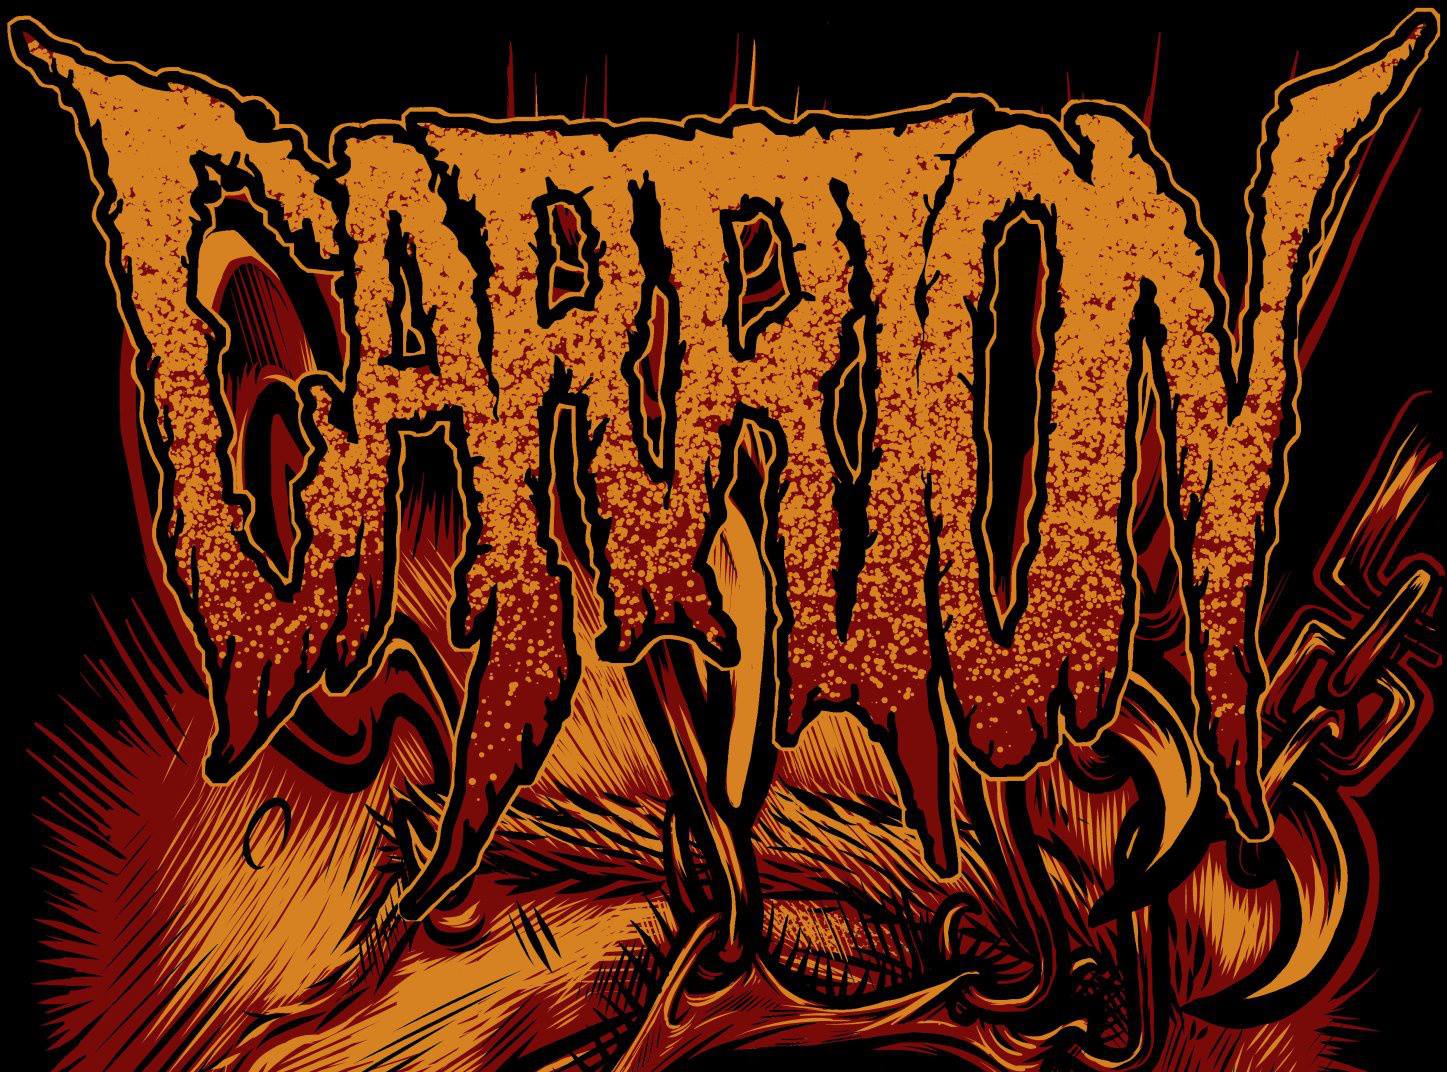 download free carrion price